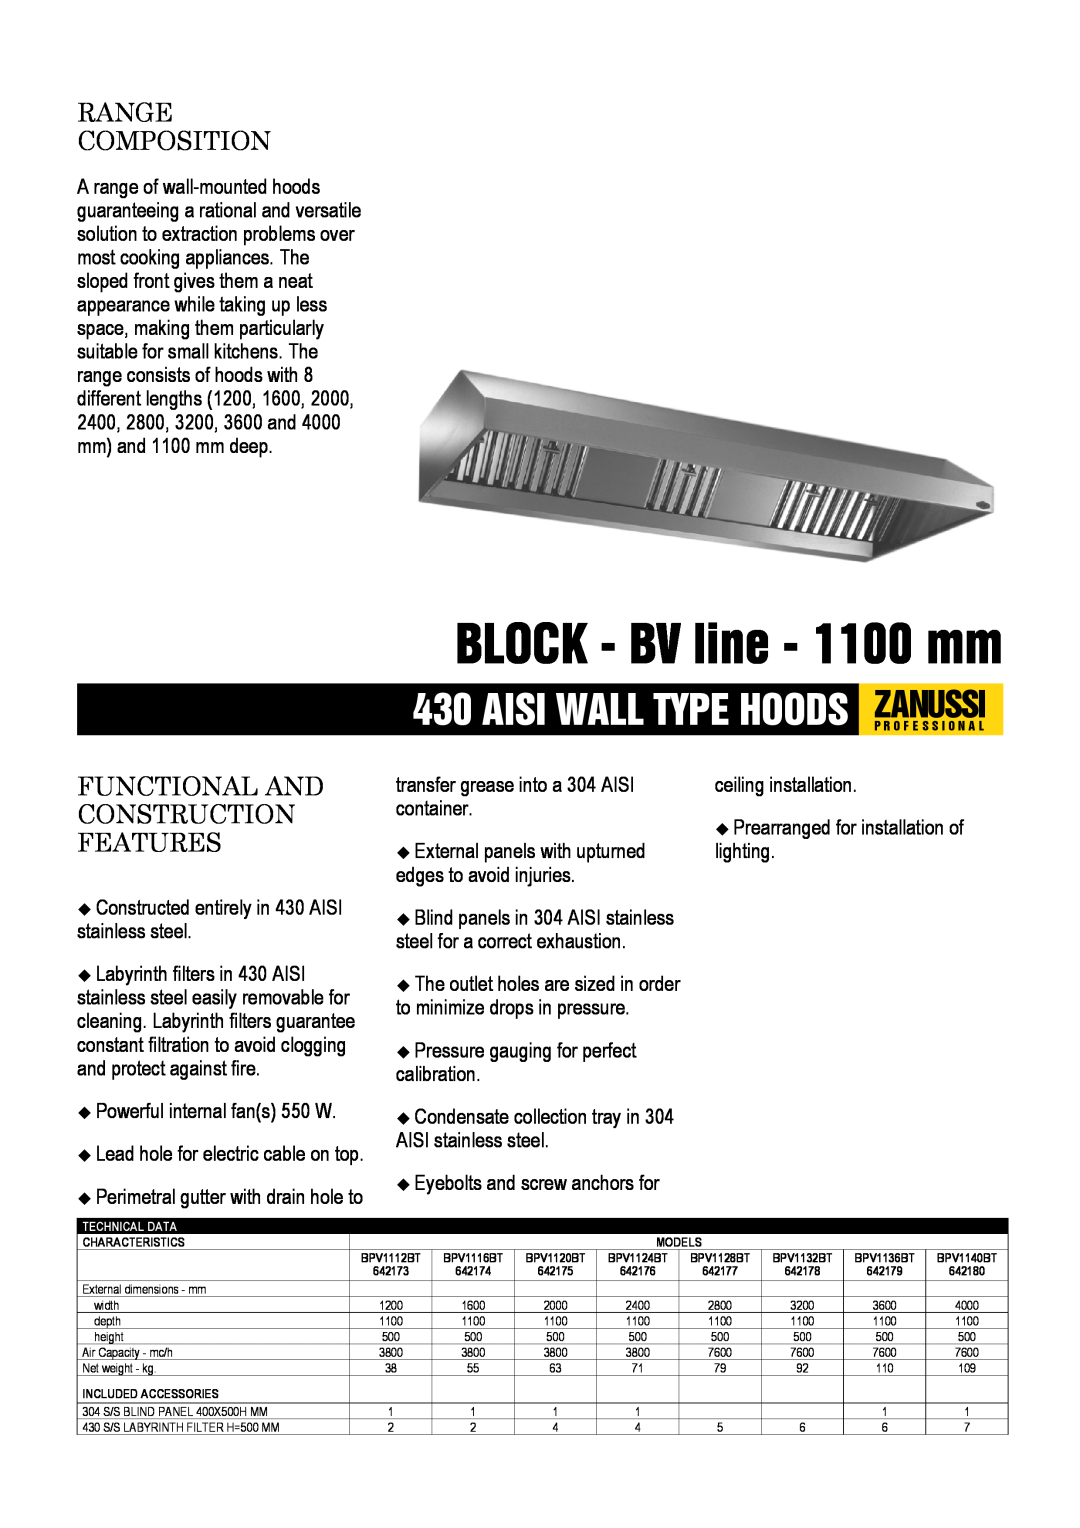 Zanussi BPV1136BT, BPV1132BT dimensions BLOCK - BV line - 1100 mm, Range Composition, Functional And Construction Features 